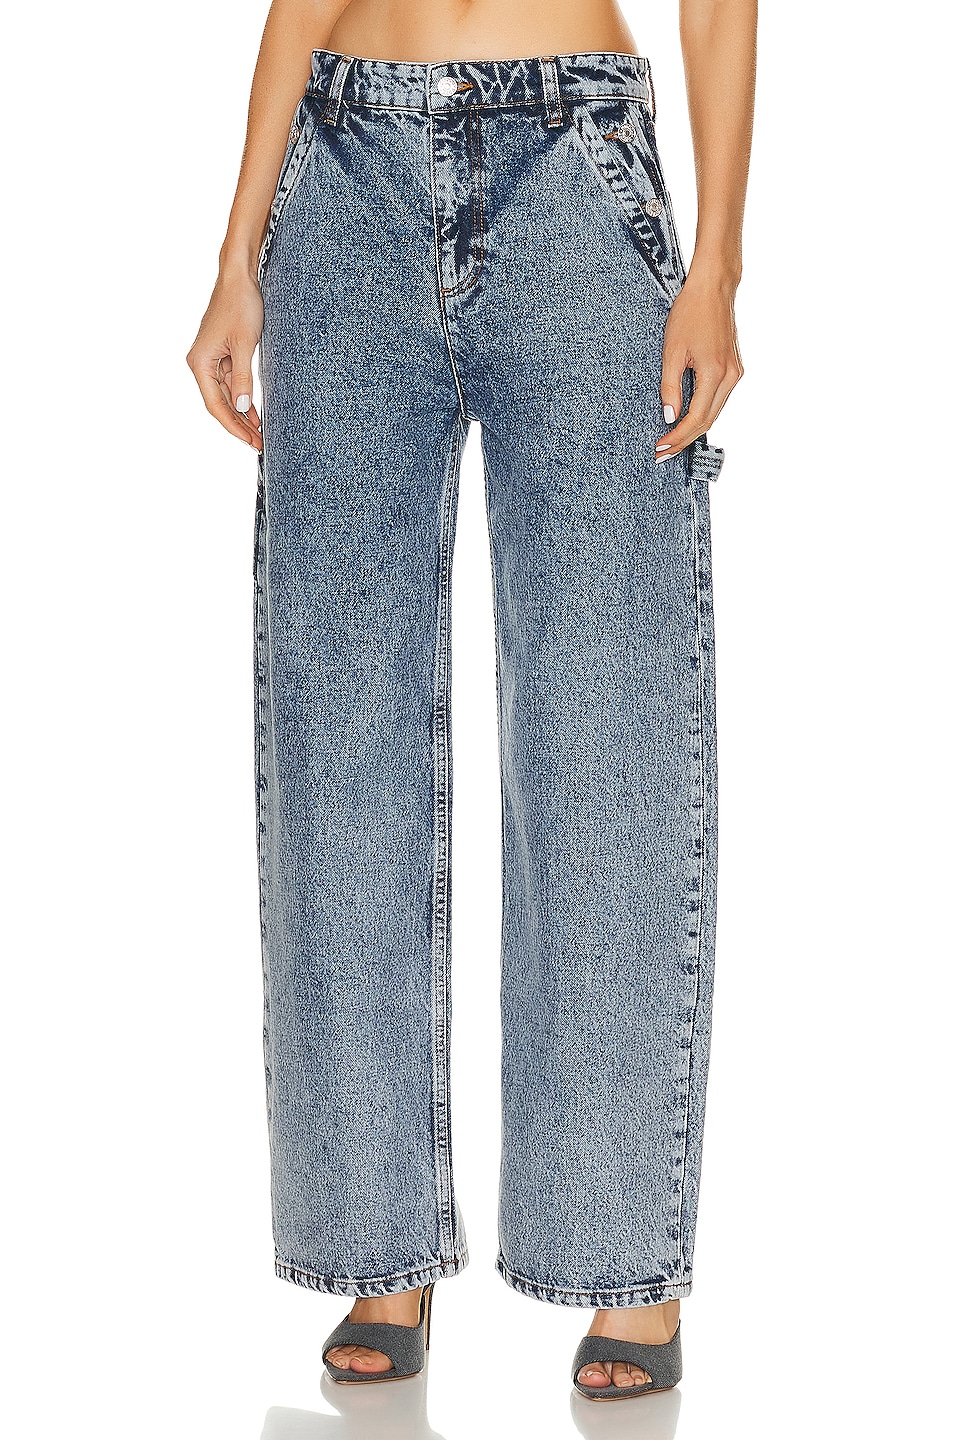 Image 1 of Moschino Jeans Wide Leg Jean in Fantasy Print Blue